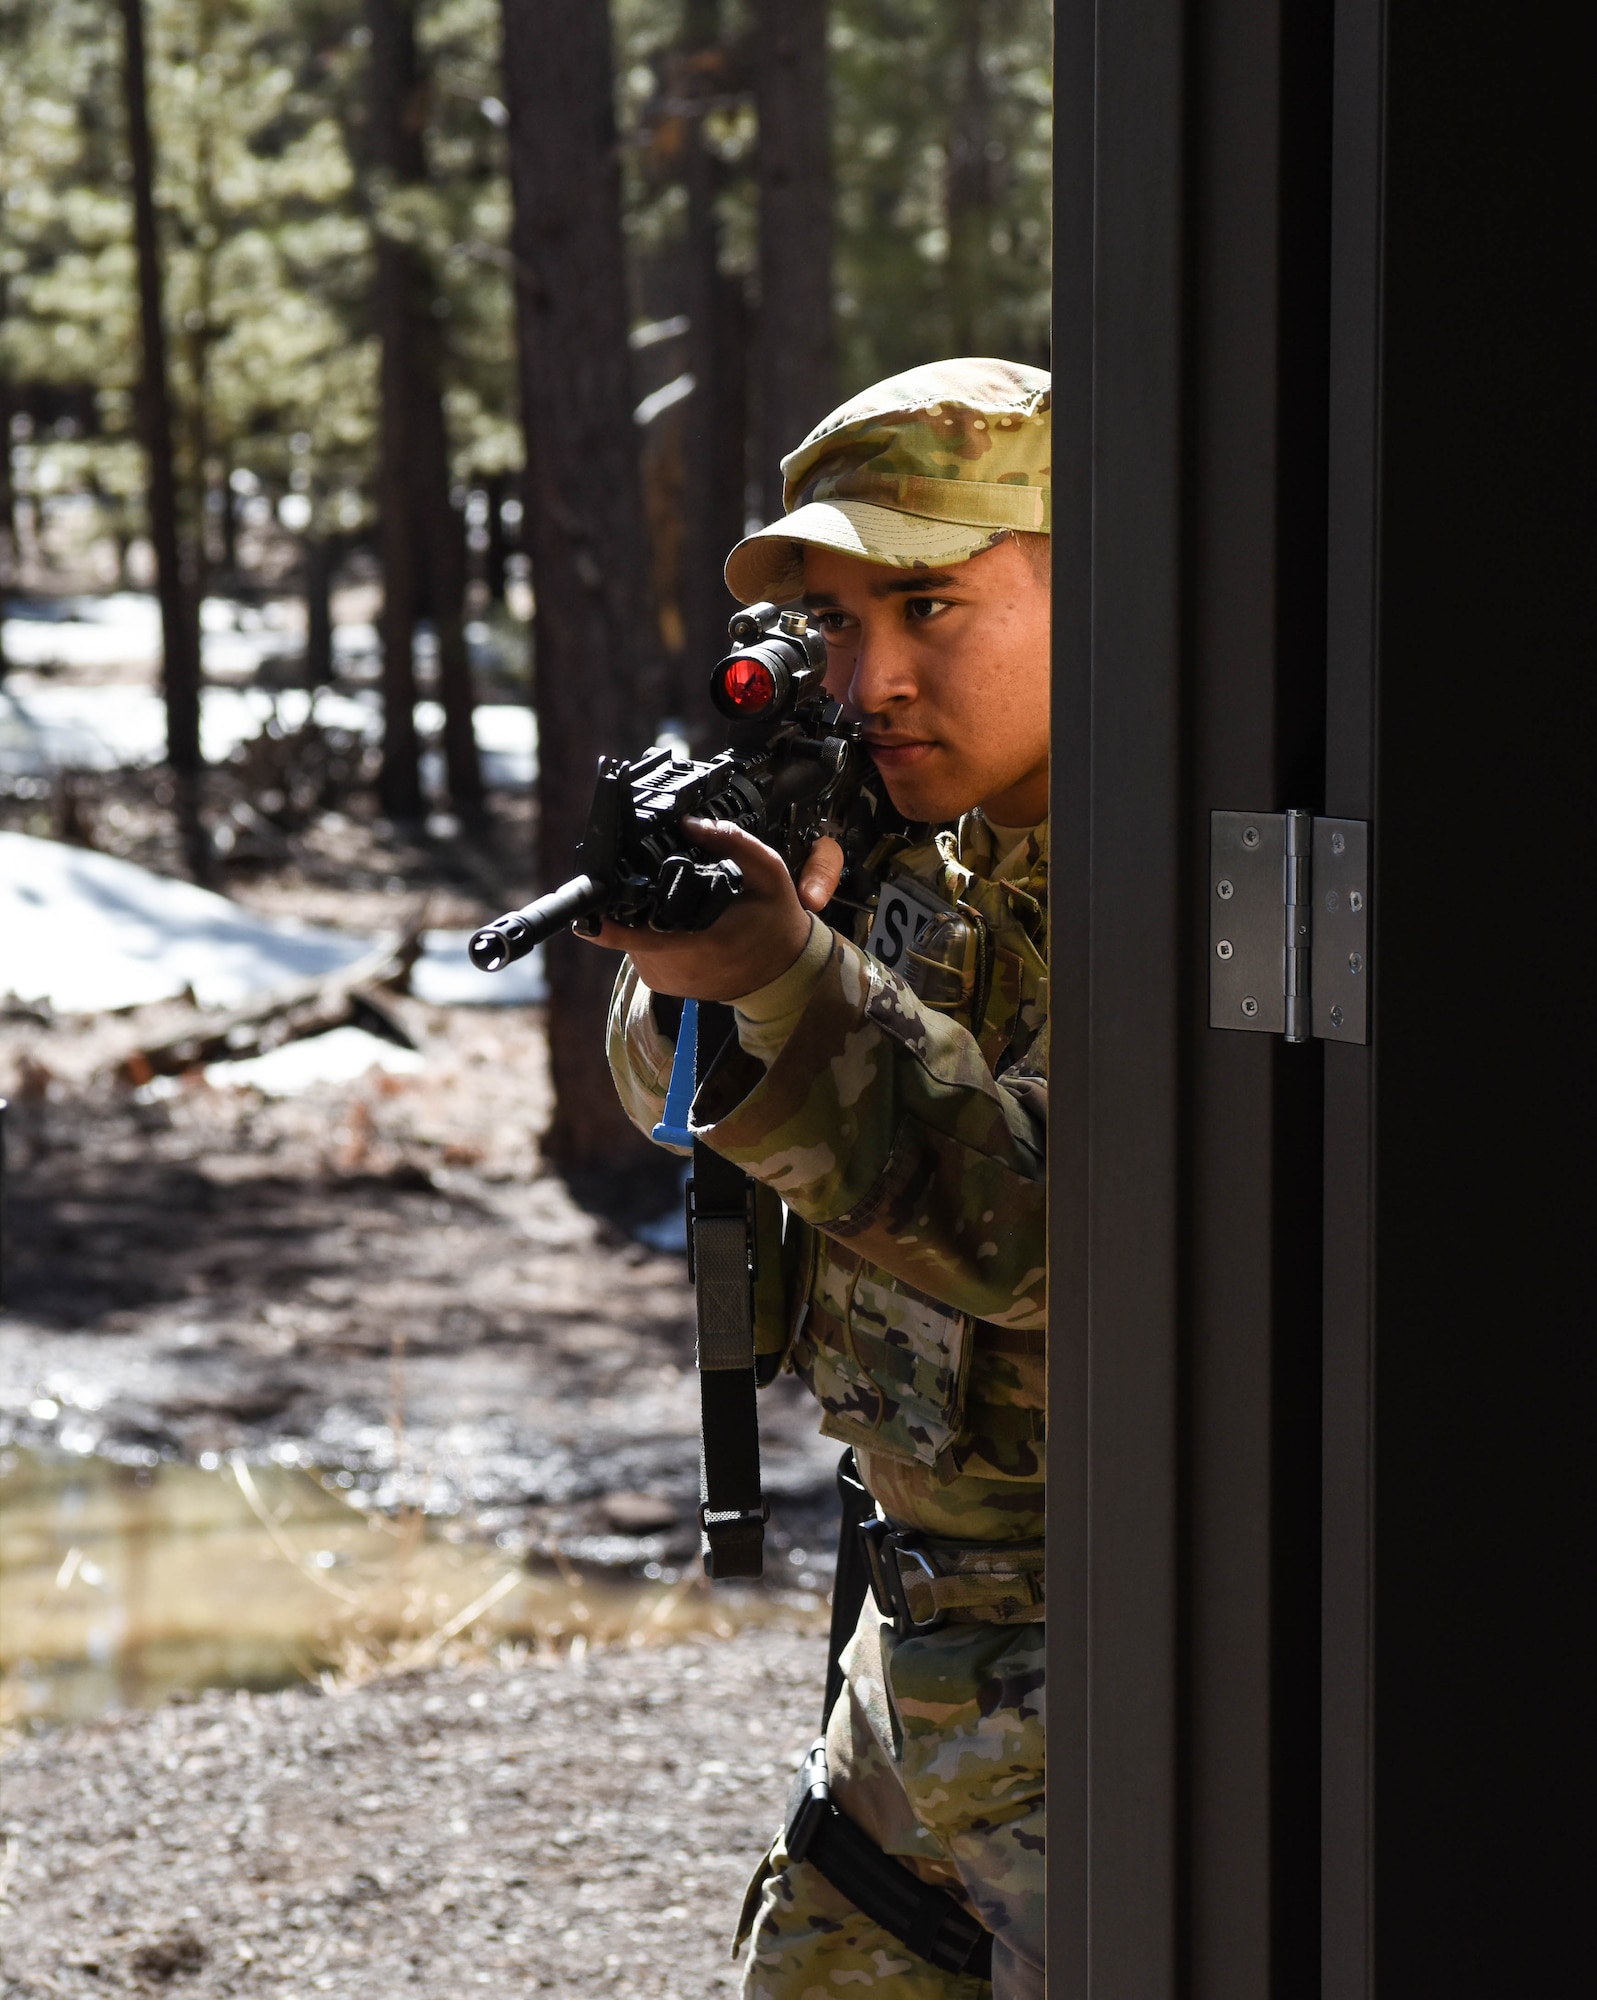 Airman 1st Class Juan Batiz Ocon, 944th Security Forces Squadron fire team member, takes his position while practicing close quarter battle tactics during a deployment training exercise, March 6, 2021 at Camp Navajo, Bellemont, Arizona. During the four-day exercise, Airmen participated in classroom instruction and hands-on training including recovery missions, land navigation, weapons qualification, and base security operations.